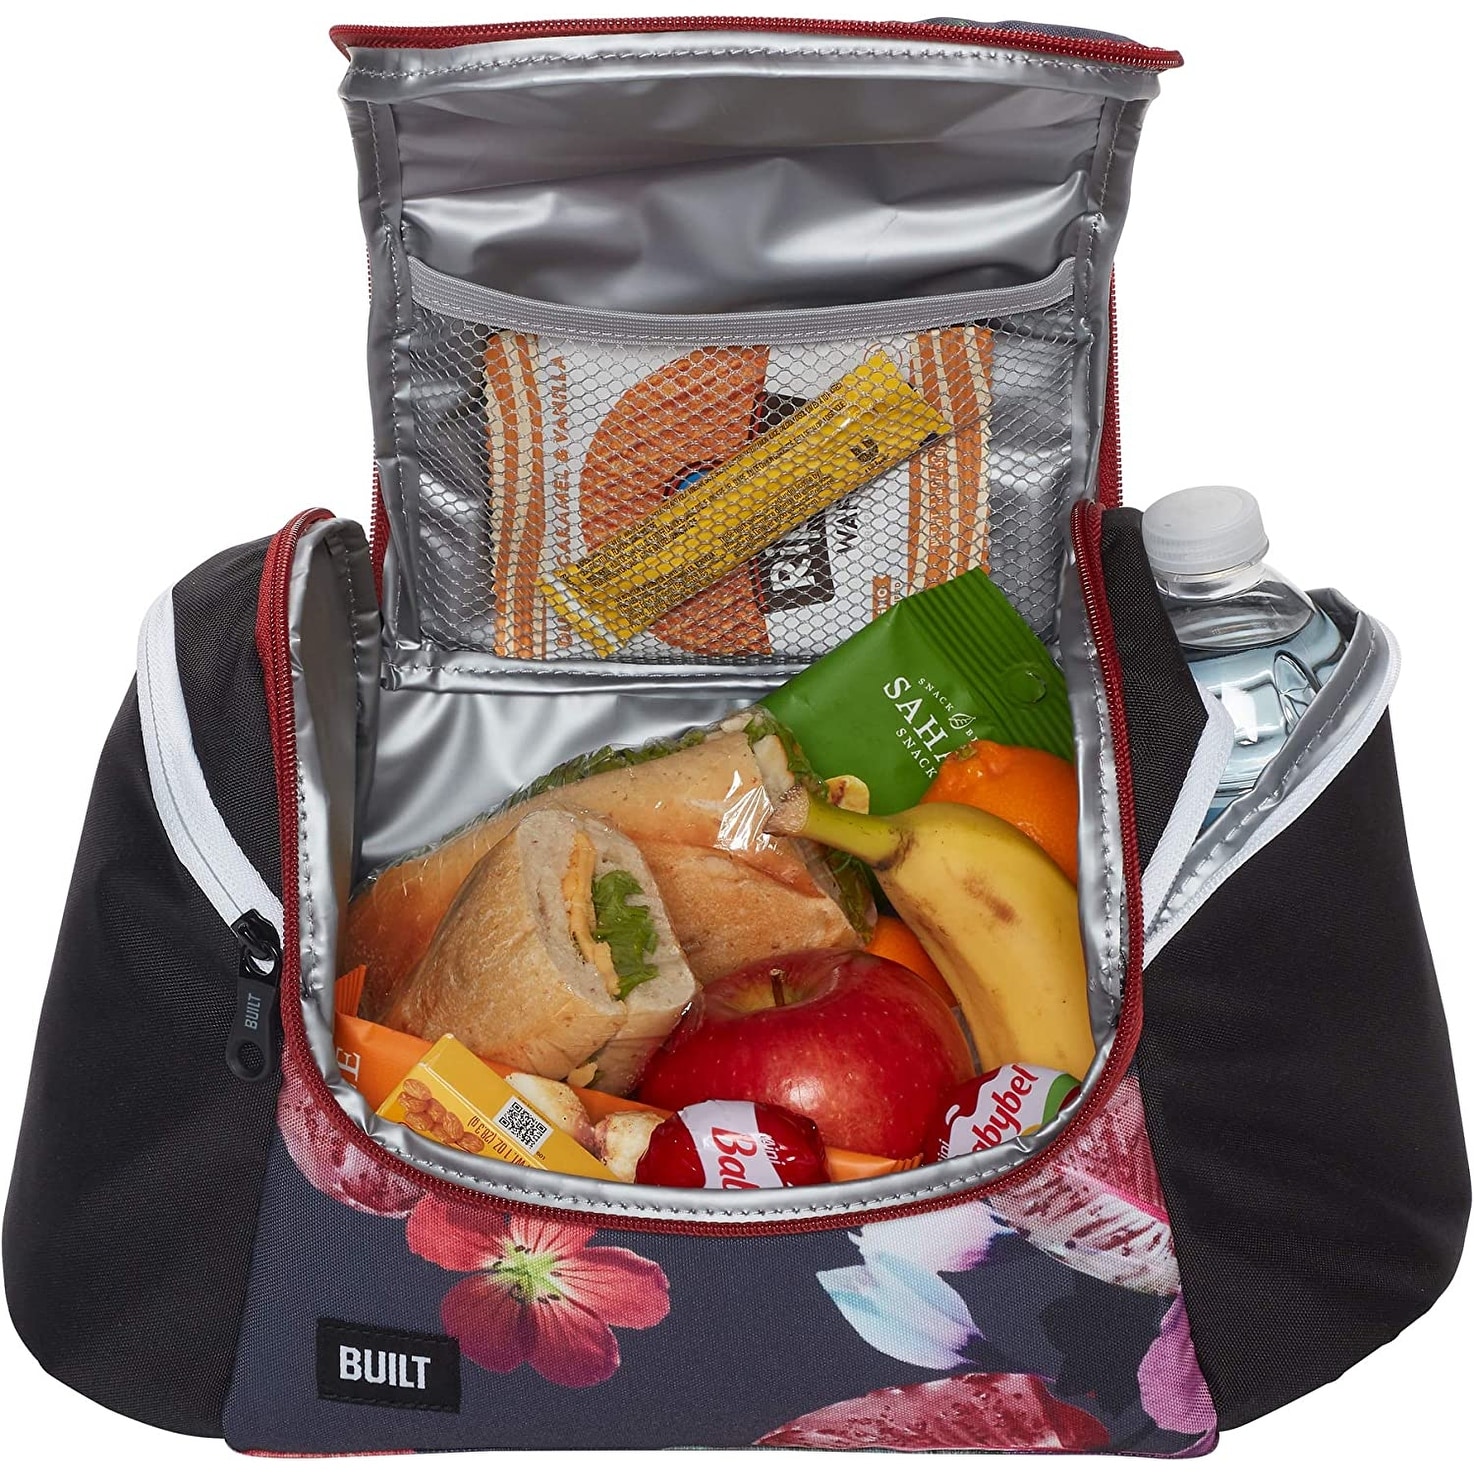 https://ak1.ostkcdn.com/images/products/is/images/direct/c4bd07a0533f005cc195b9b7aacc5f7fb5afd3cc/BUILT-All-Day-Lunch-Bag-with-Zip-Closure.jpg